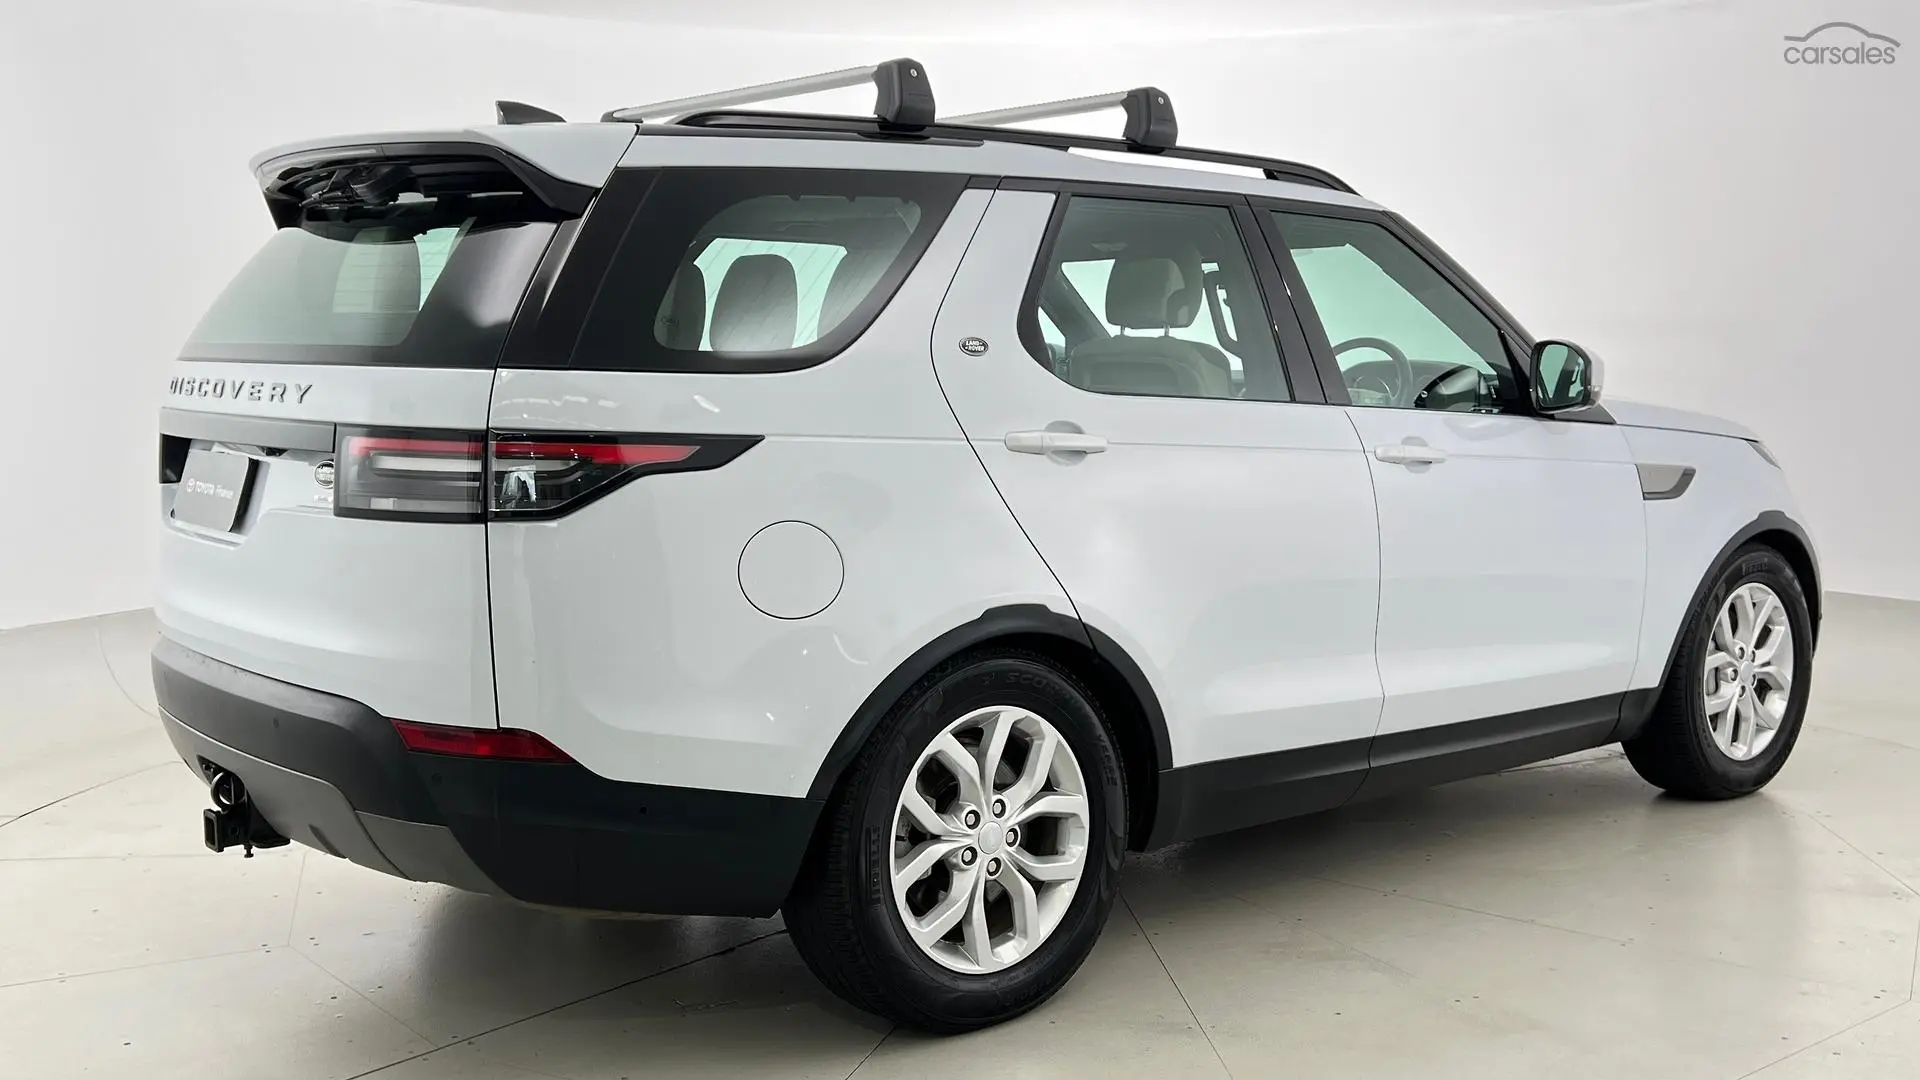 2019 Land Rover Discovery Image 10